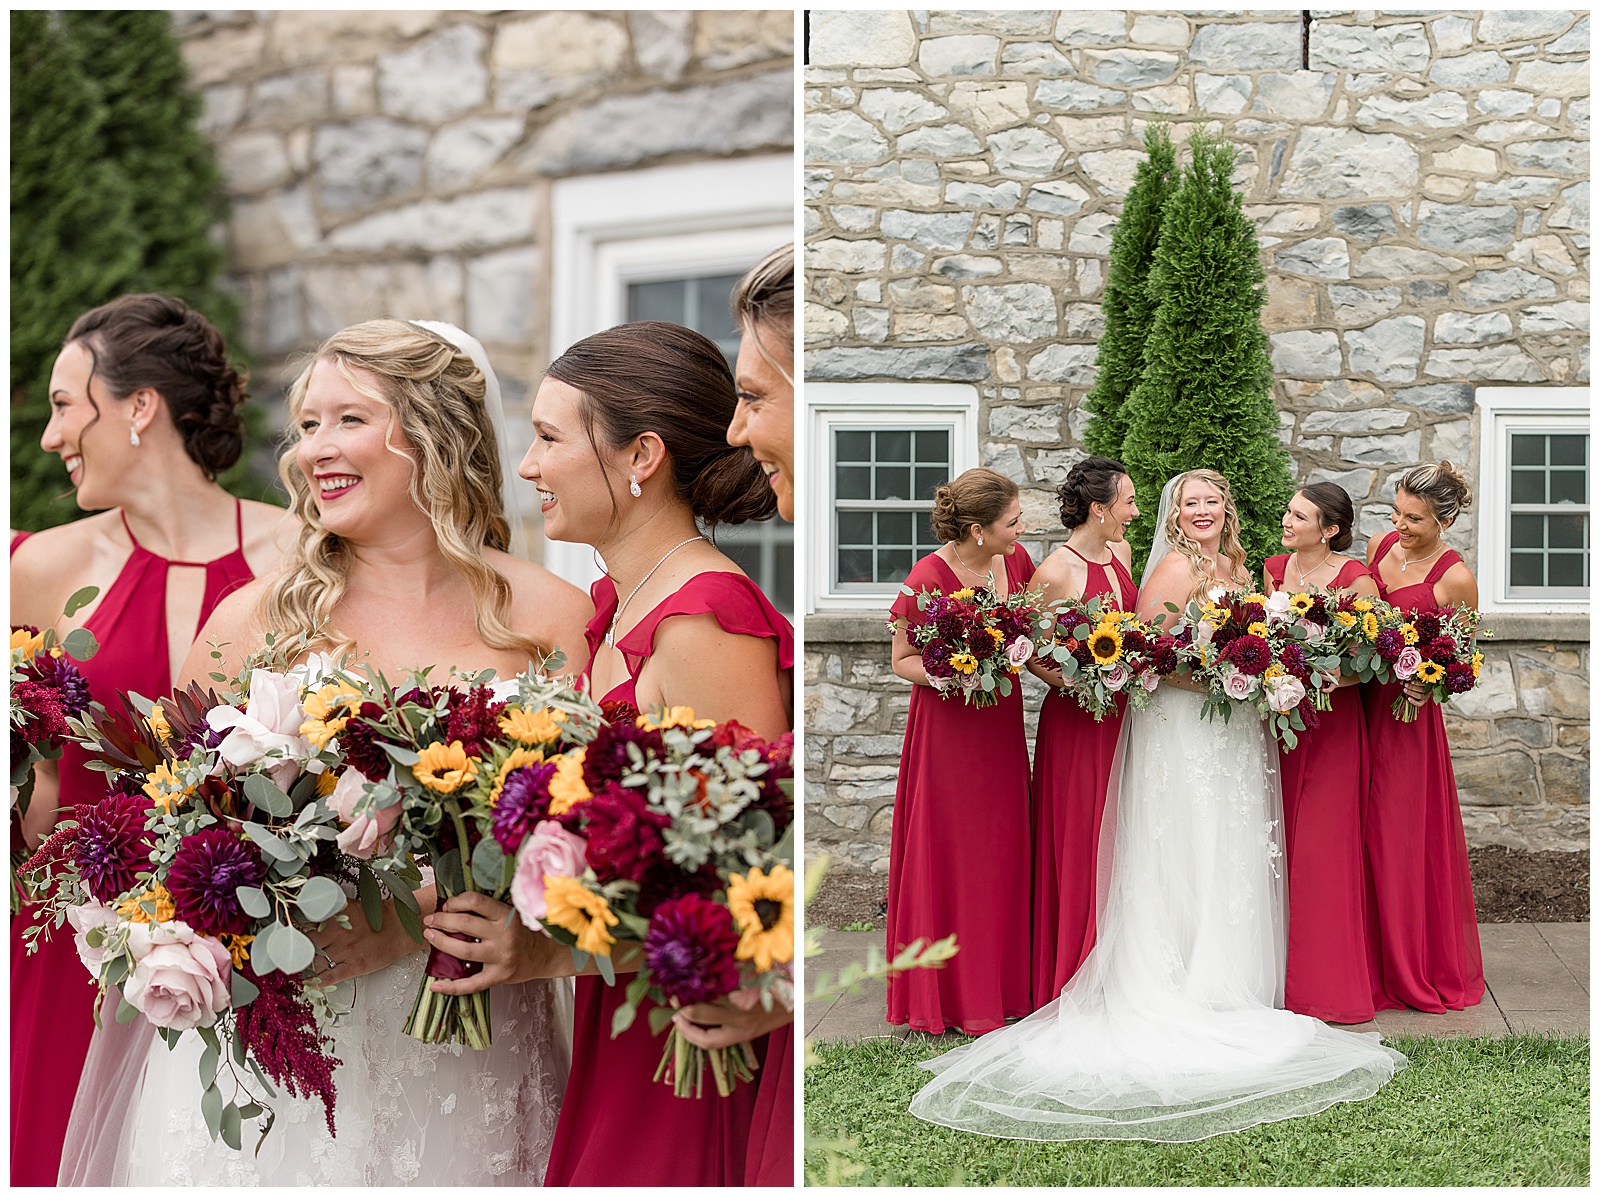 bride with her bridesmaids all looking at her and smiling by stone wall with shrubbery behind them